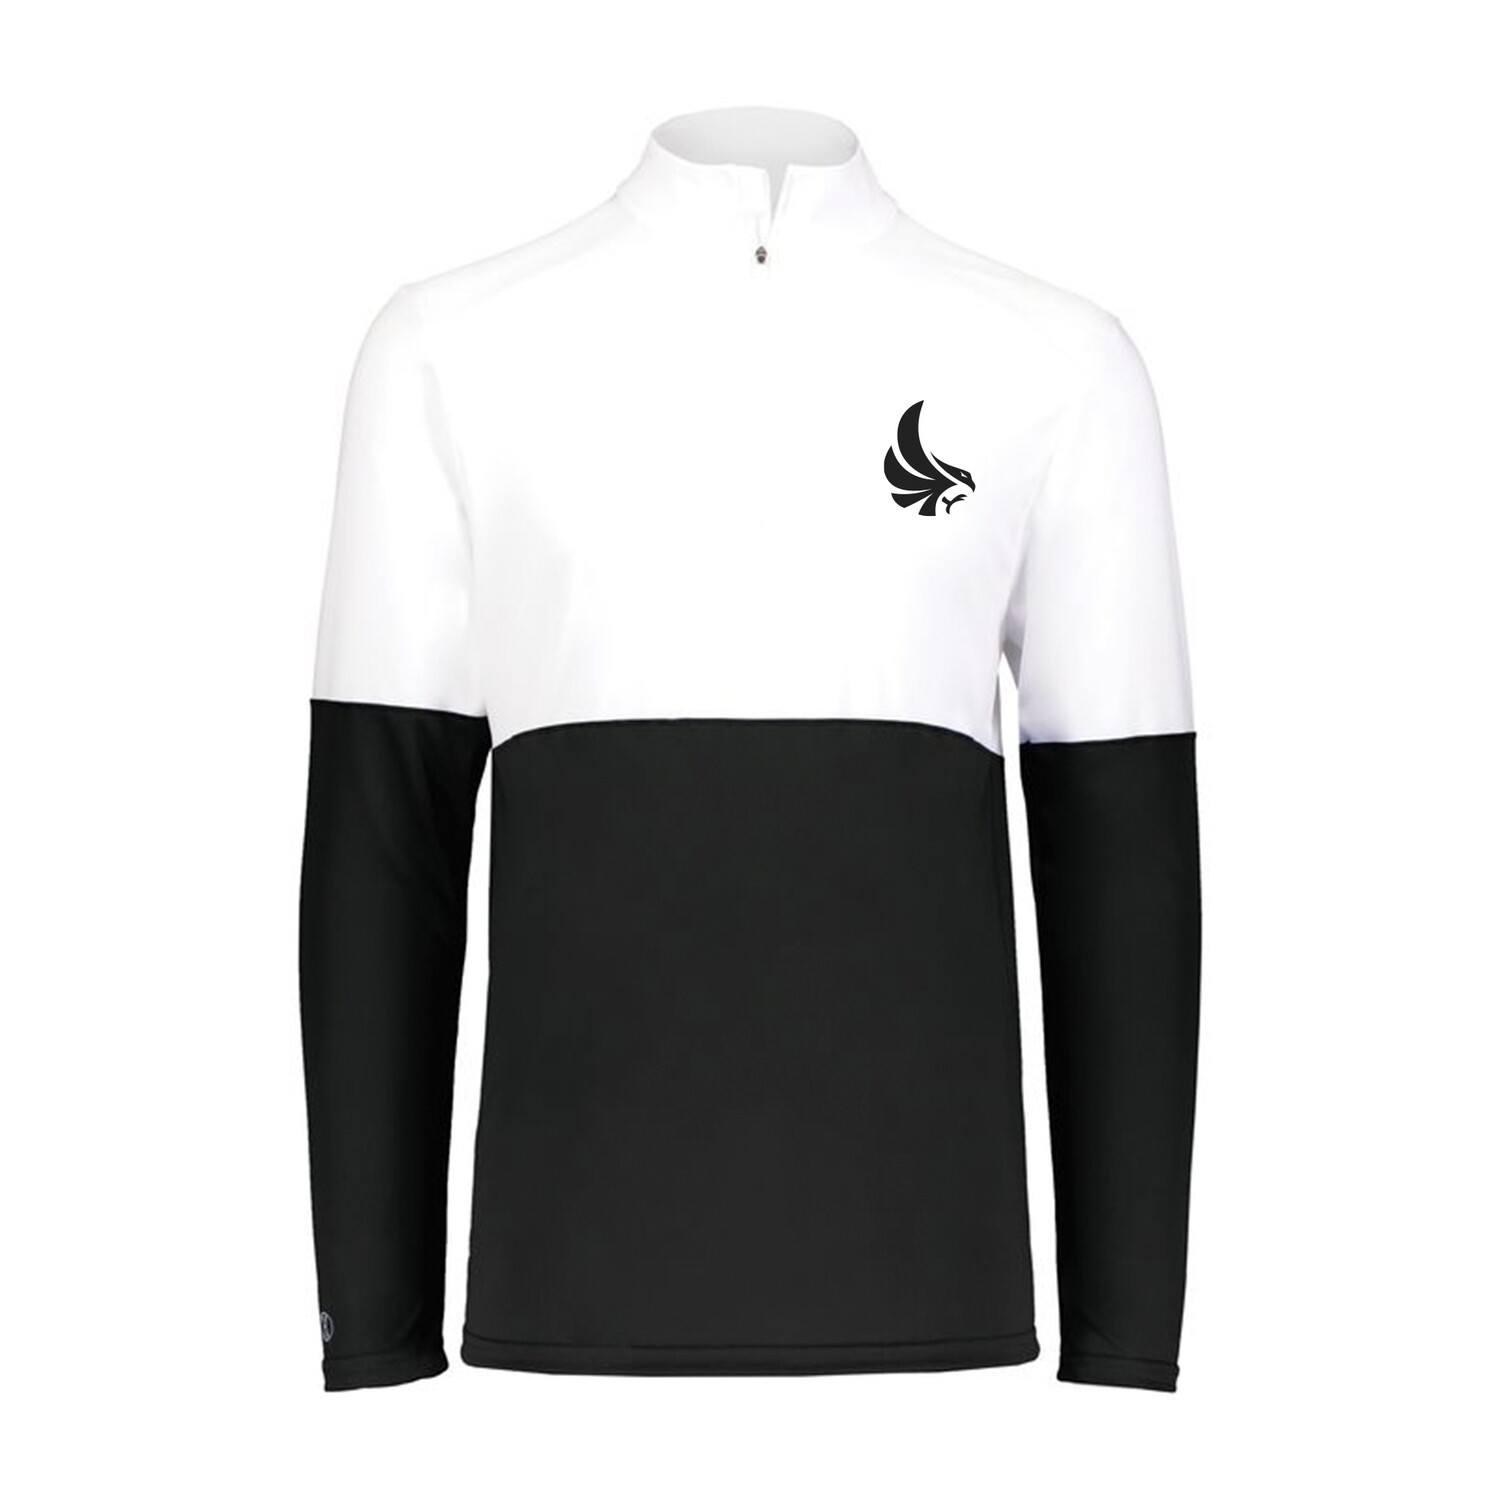 LADIES 1/4 ZIP PULLOVER - WHITE/BLACK, SIZE:: SMALL